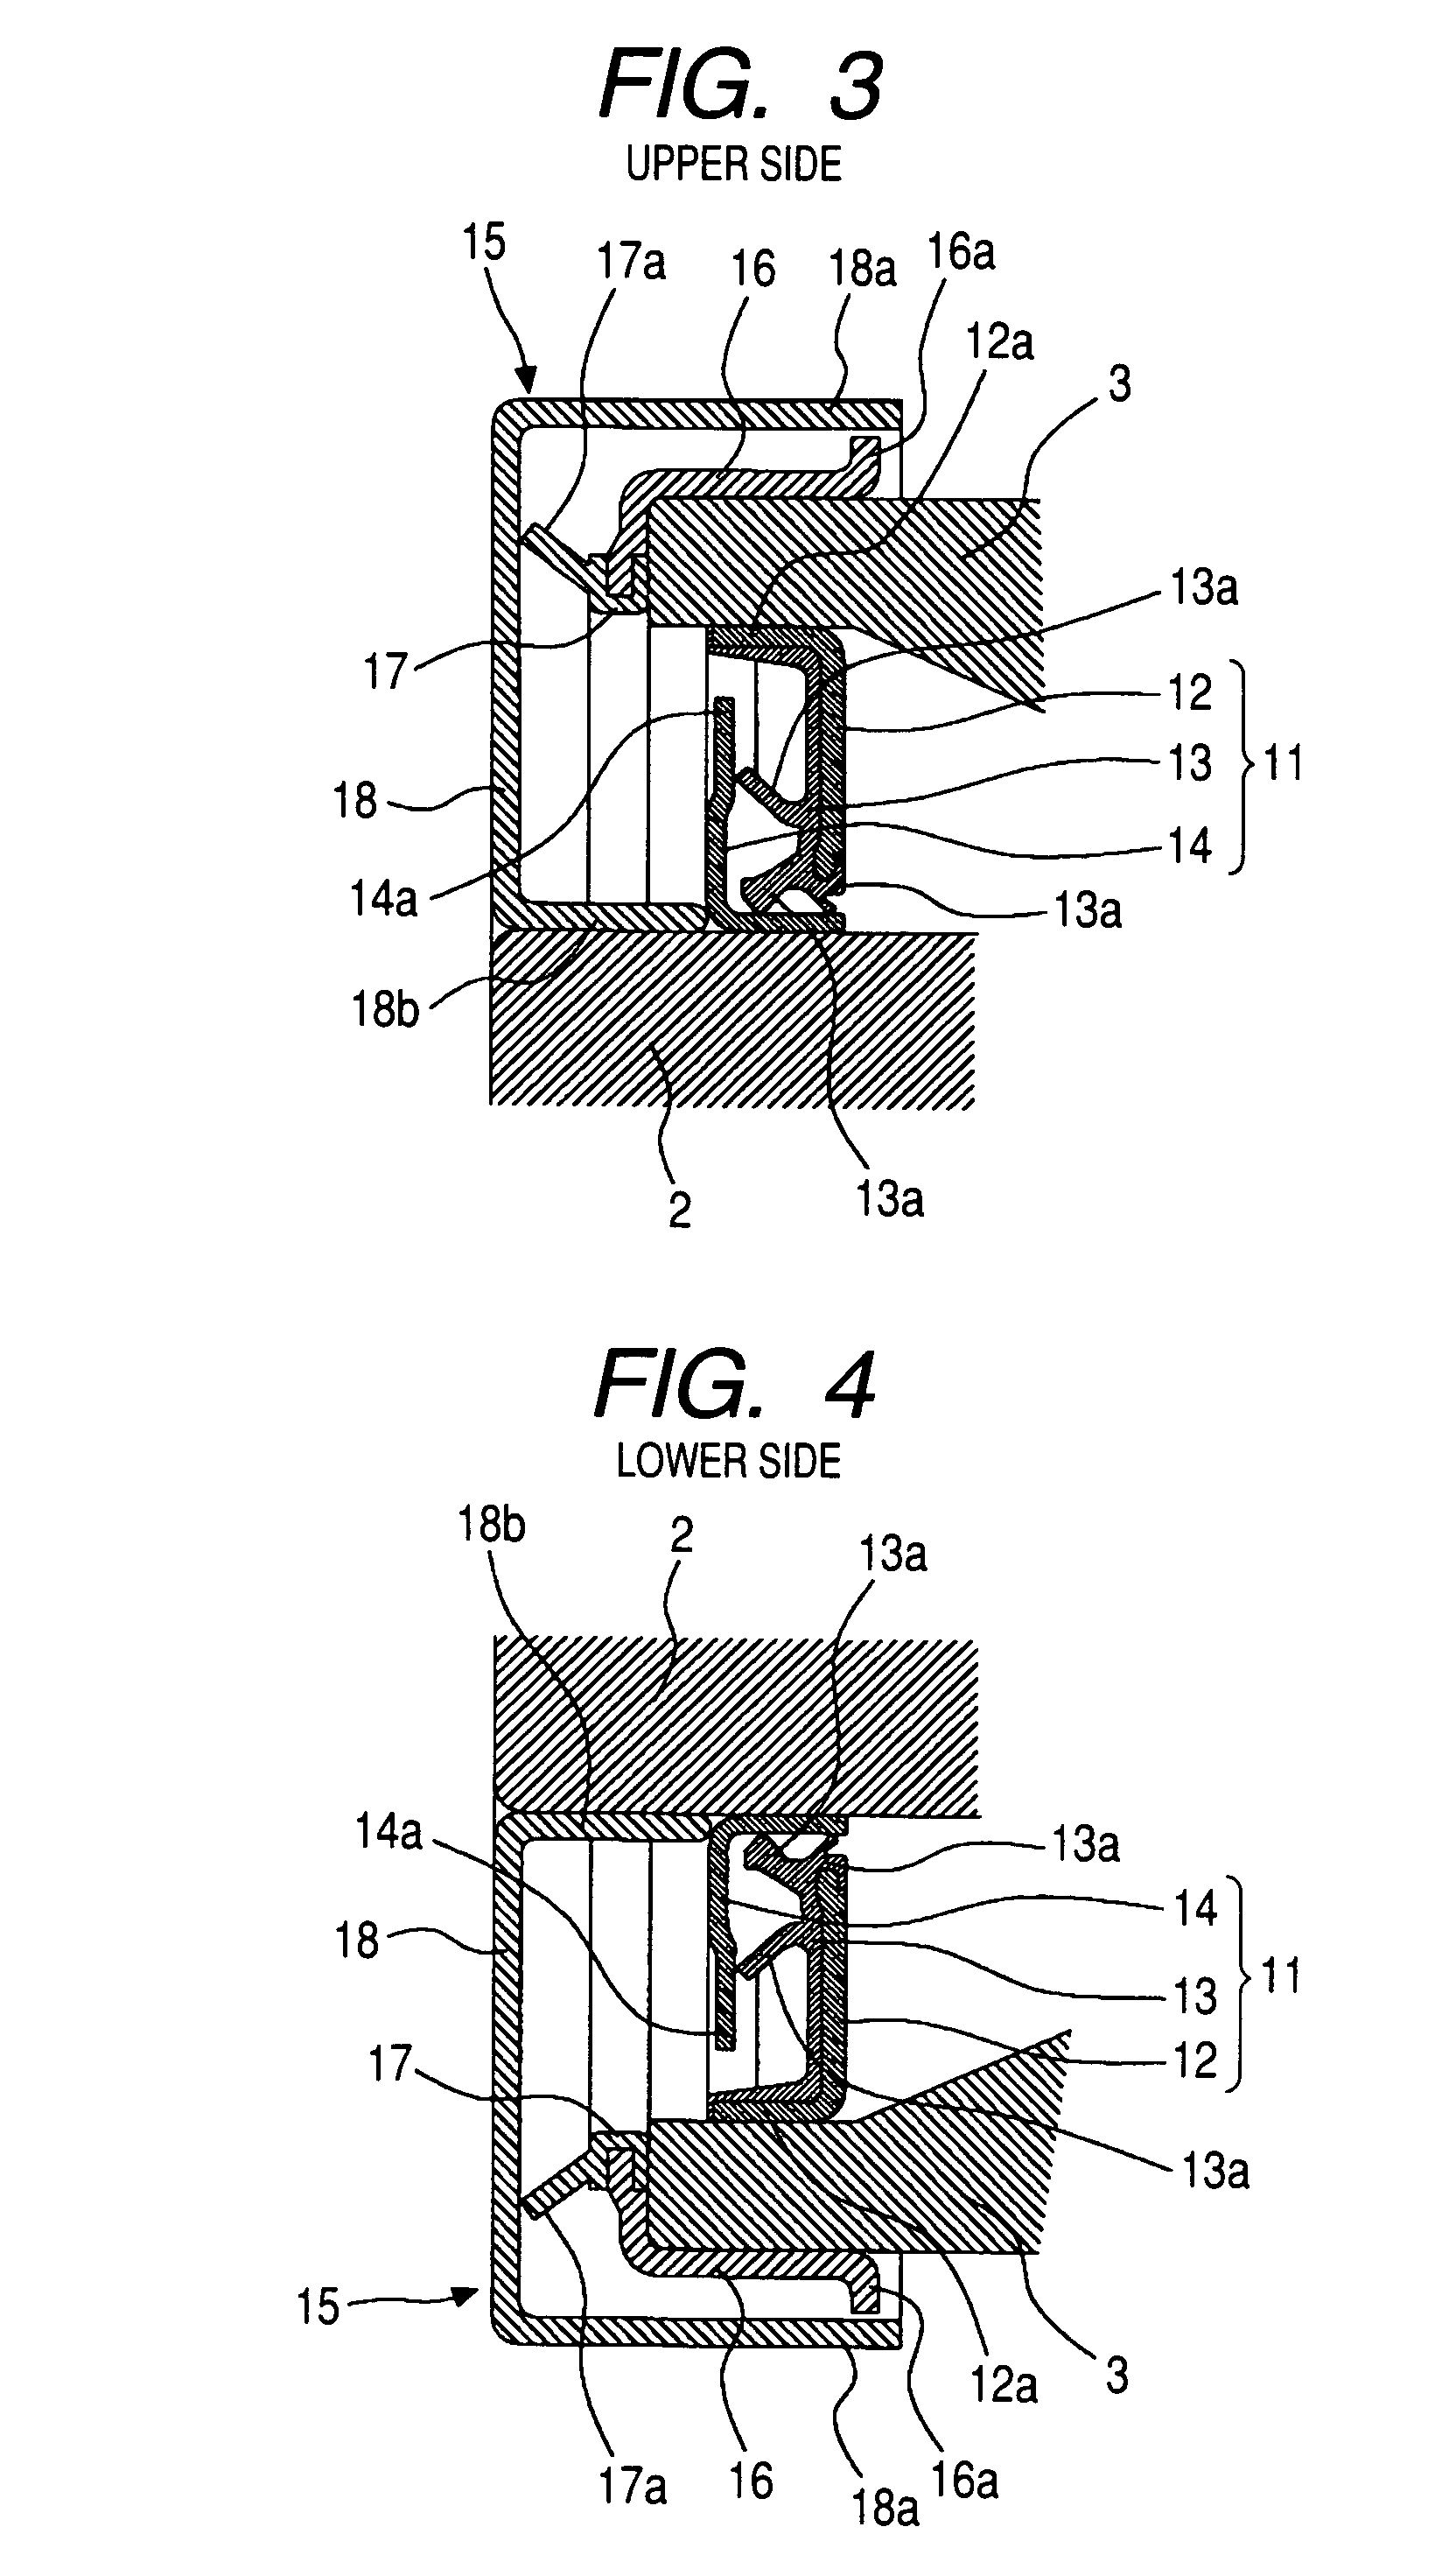 Bearing apparatus for axle